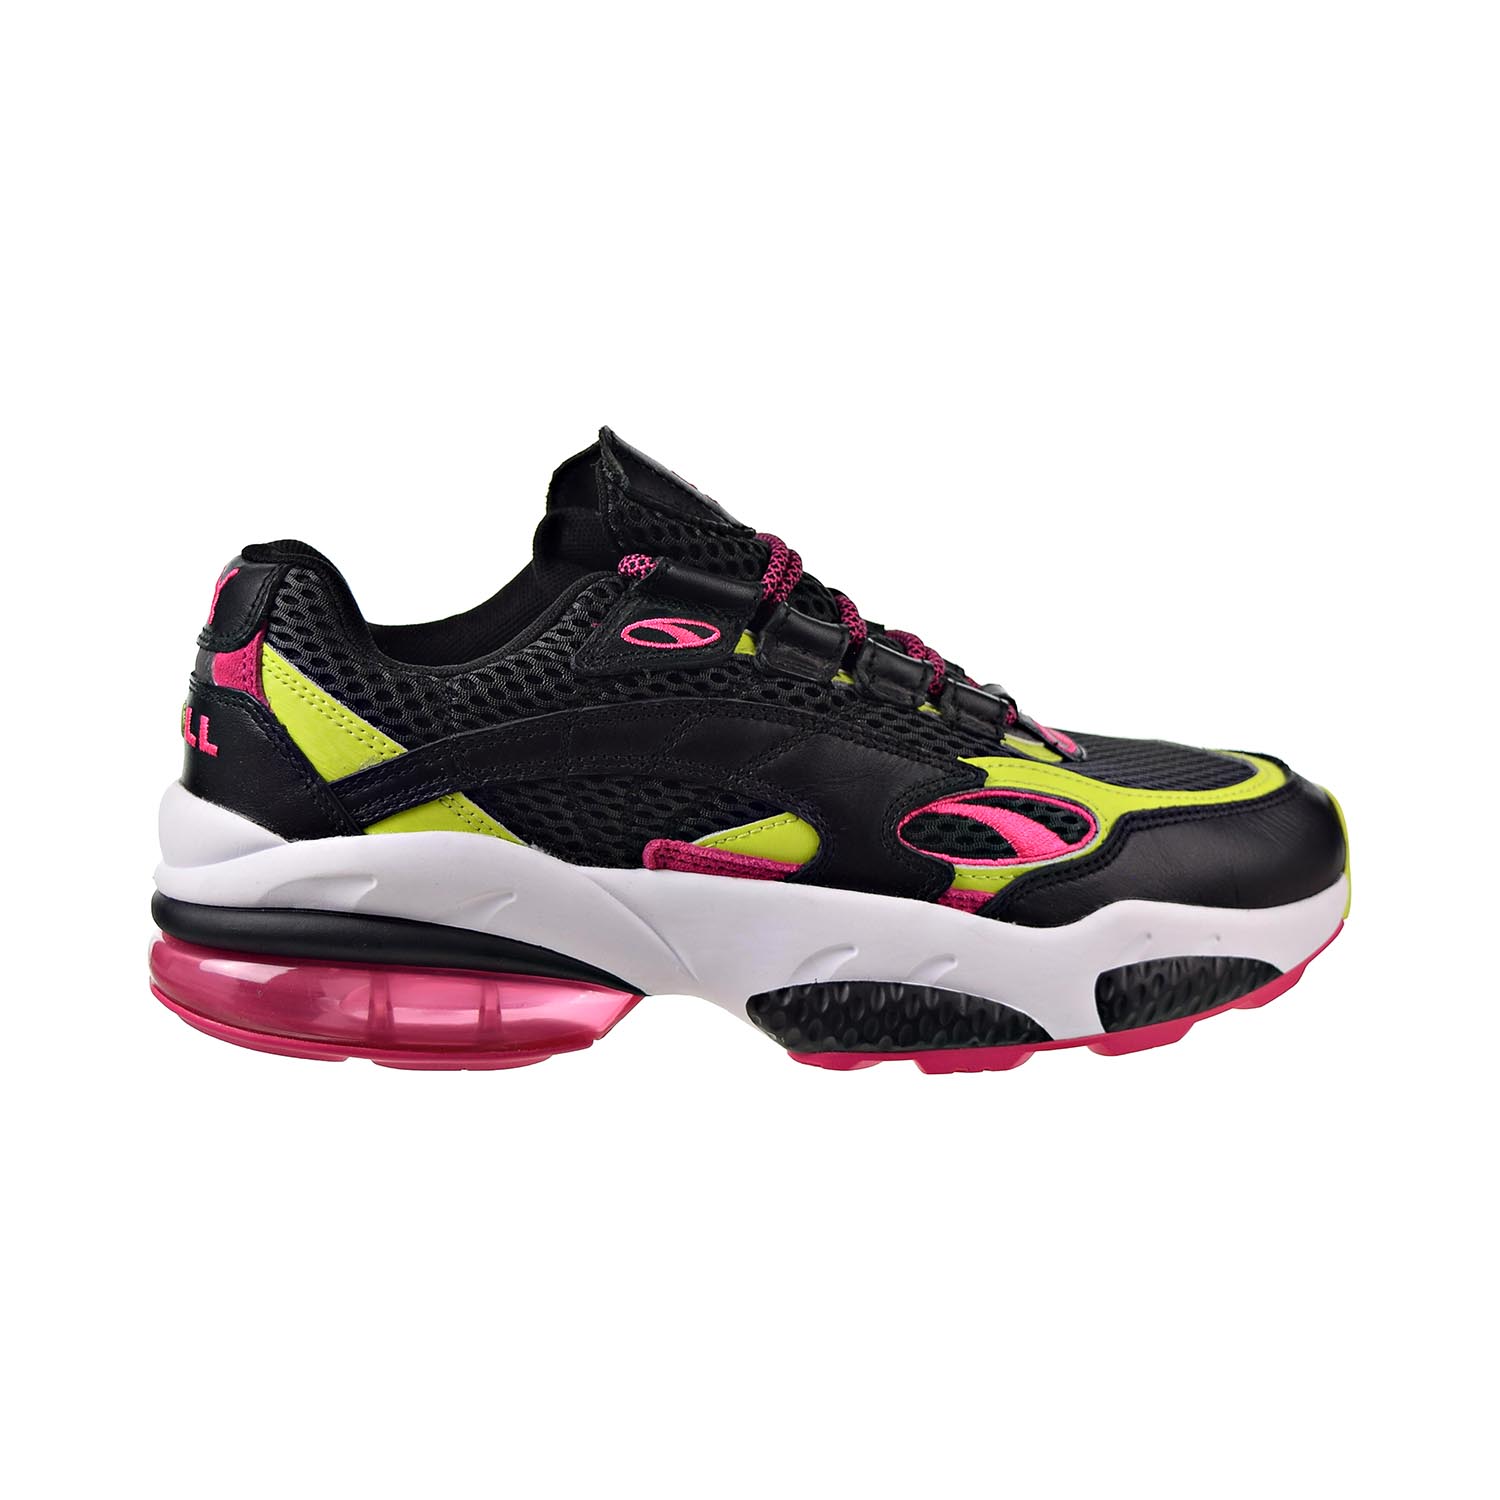 Puma Cell Venom 370417-01 Men Black/Pink/Lime Punch Athletic Running Shoes C1385 (11) - image 1 of 6